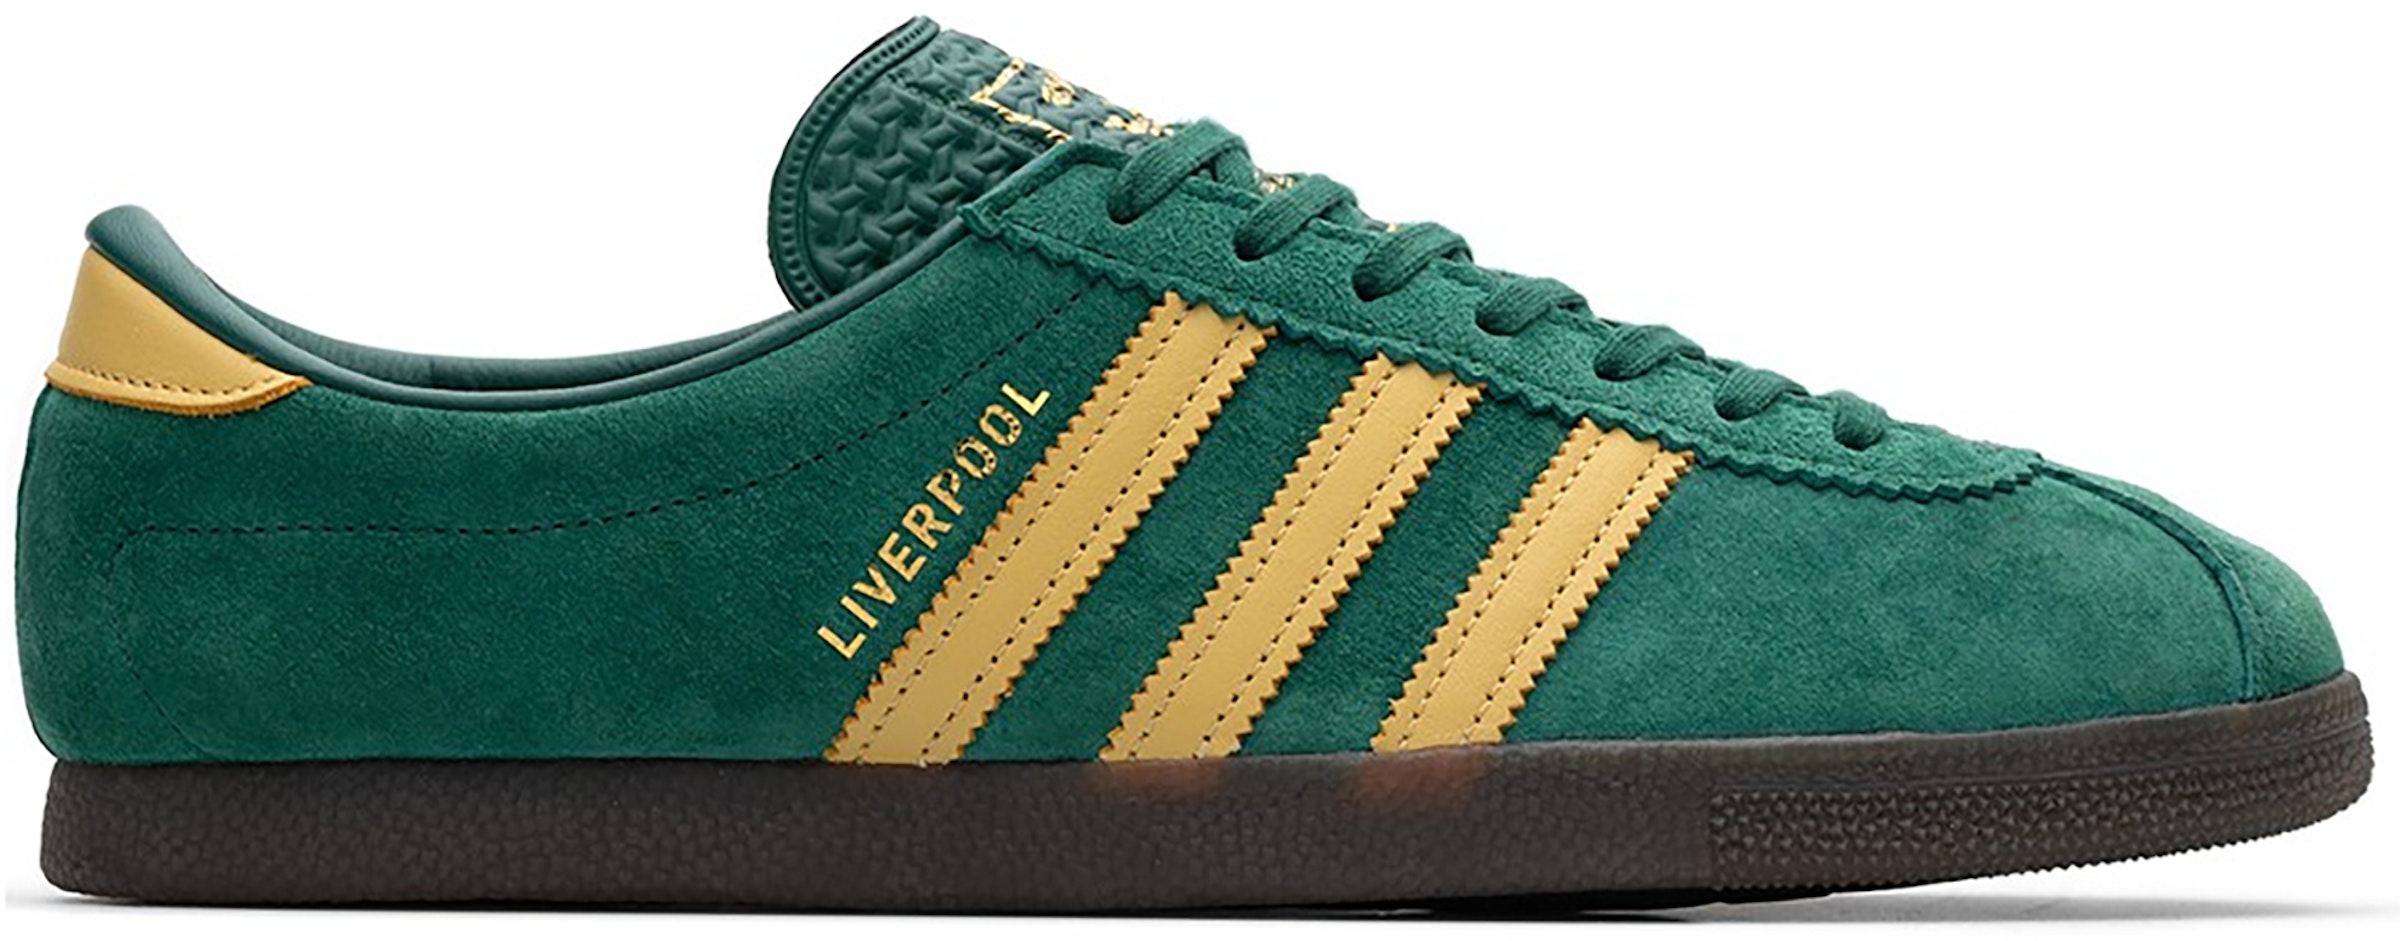 Clam Geld rubber Albany adidas Liverpool size? City Series Men's - FW6374 - US